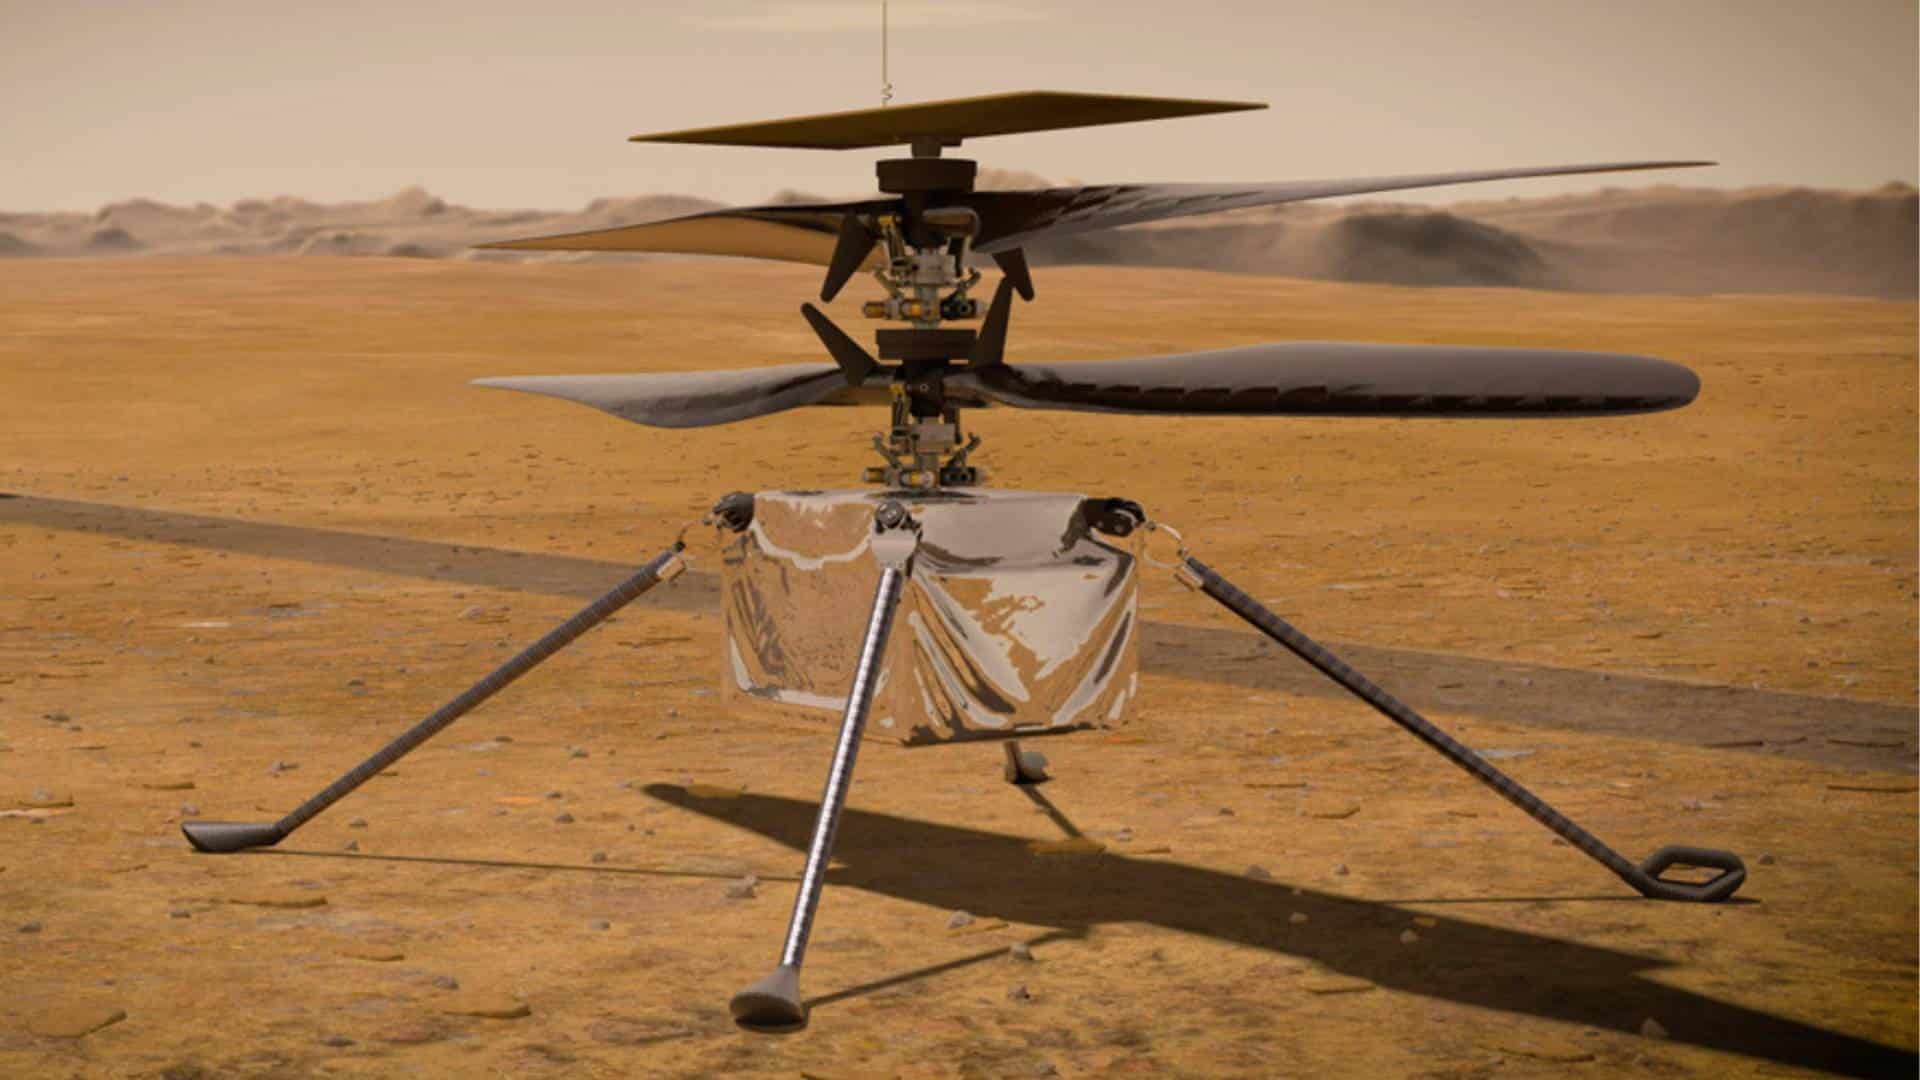 An illustration of NASA's Ingenuity Mars Helicopter stands on the Red Planet's surface as NASA's Perseverance rover (partially visible on the left) rolls away.